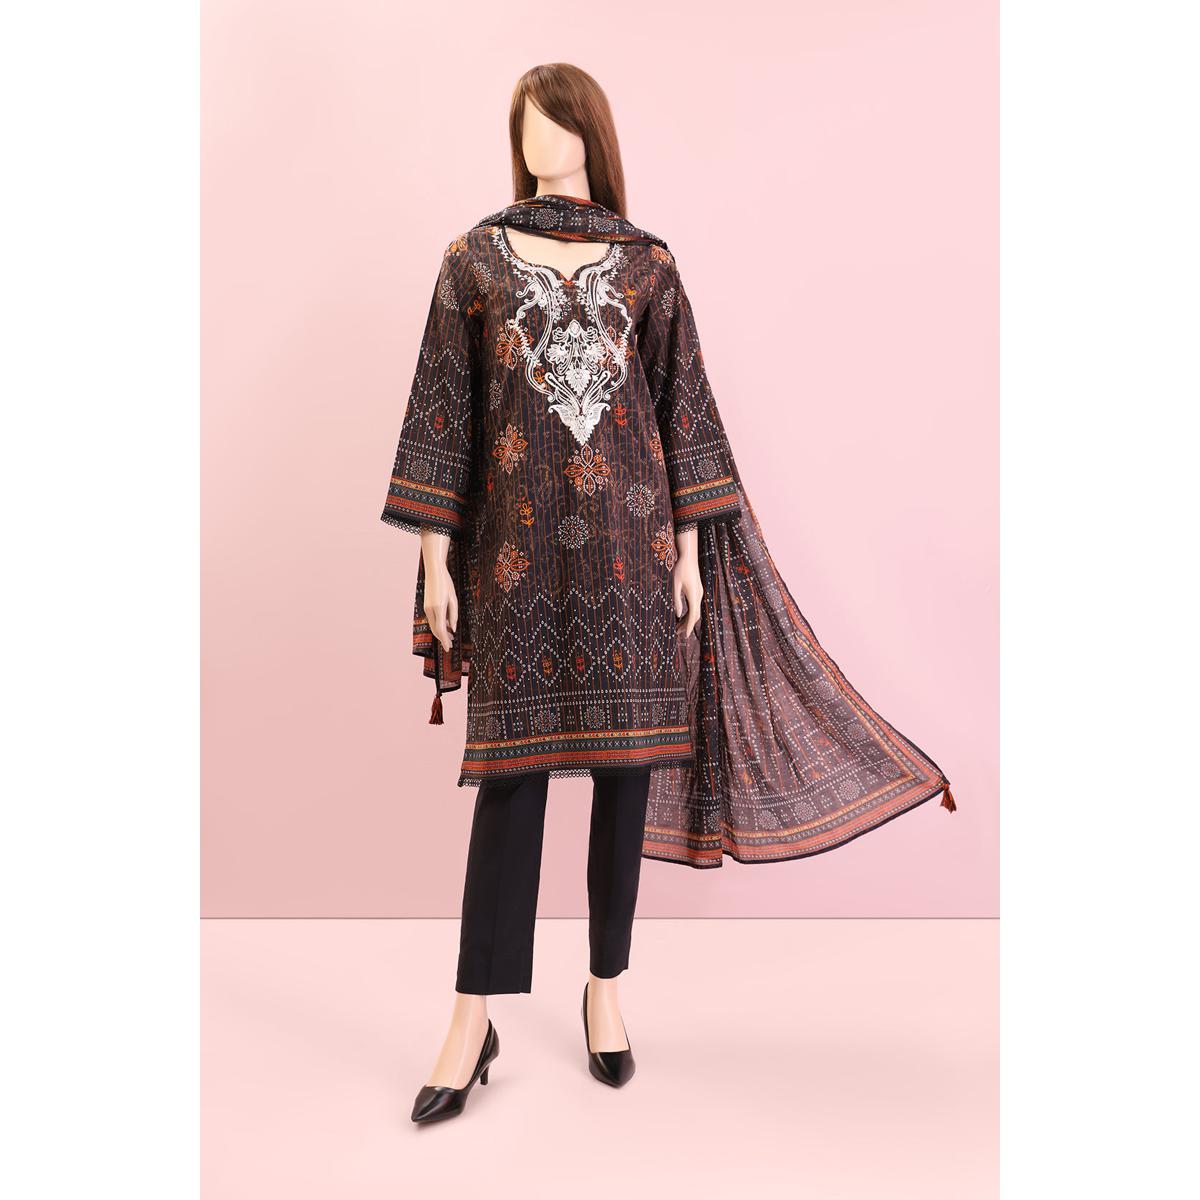 Saya Saffron Unstitched Printed Embroidered Lawn 3 Piece Wuns-2831 Suit For Women